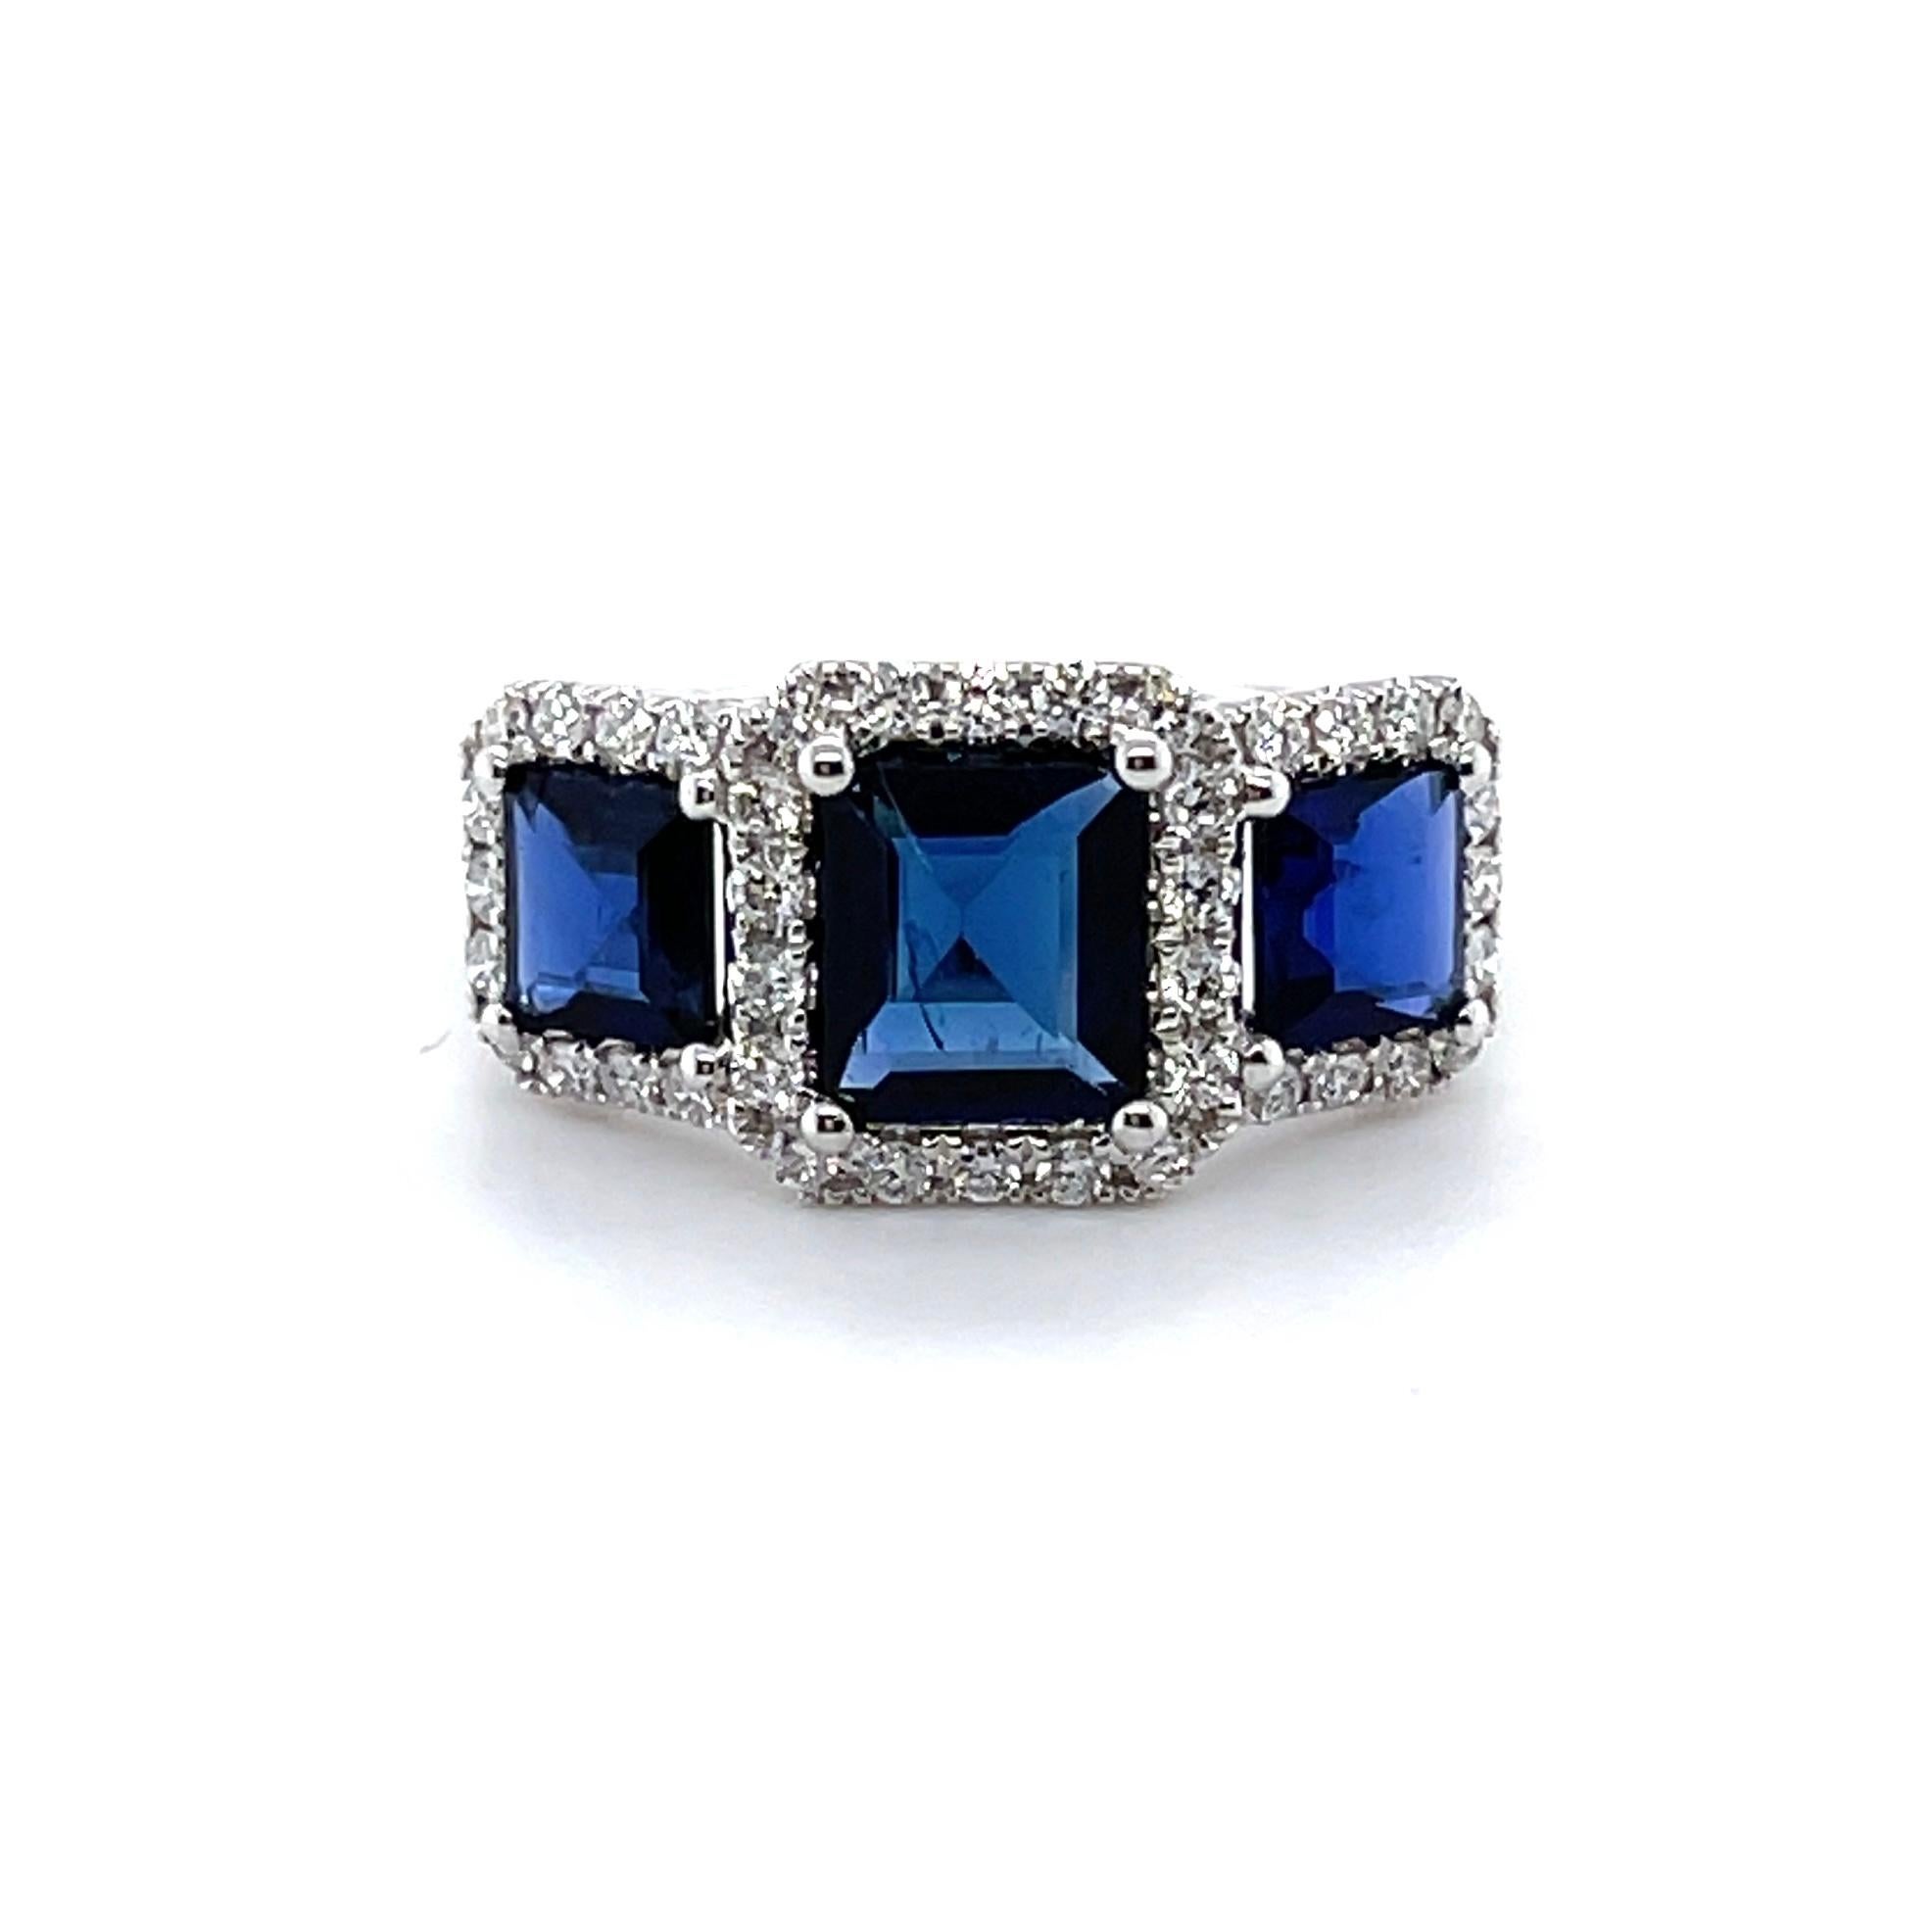 For Sale:  Imperial Jewels 18ct White Gold Trilogy Burmese Blue Sapphire & Diamond Ring